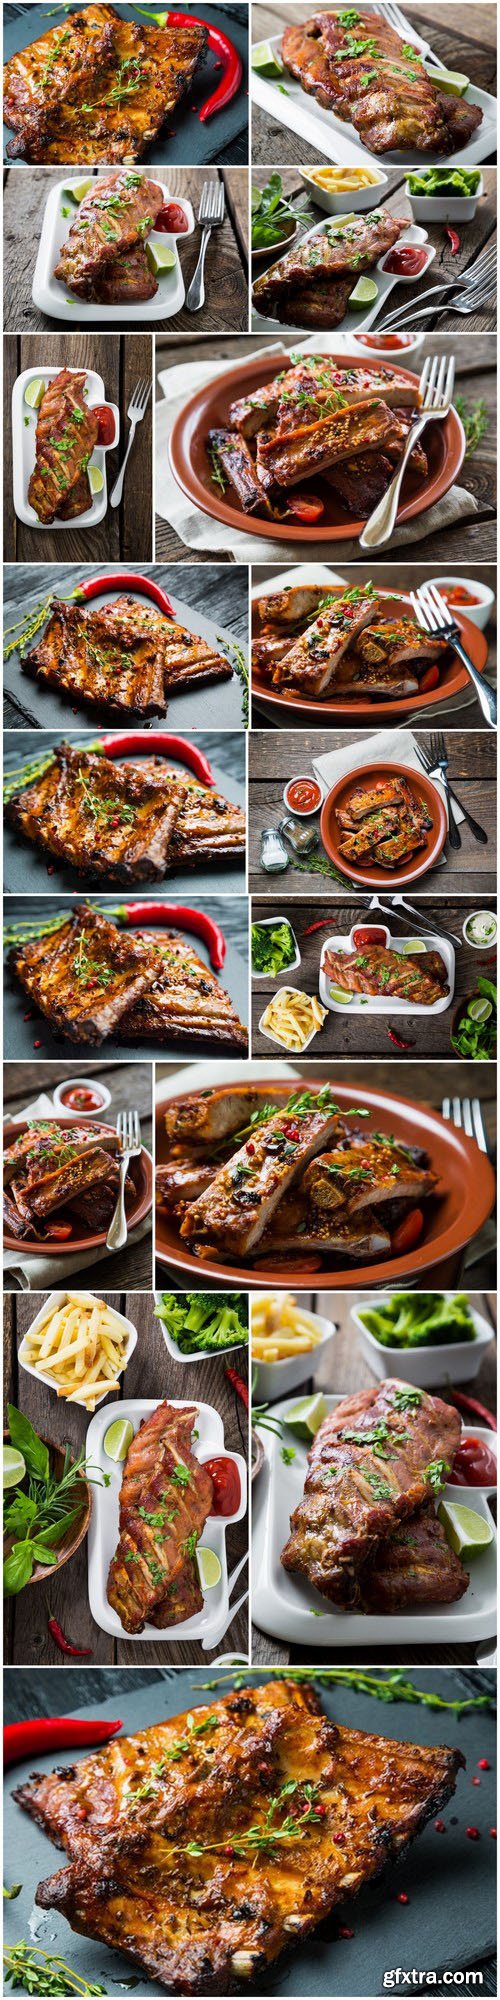 Appetizing grilled ribs - 17xUHQ JPEG Photo Stock